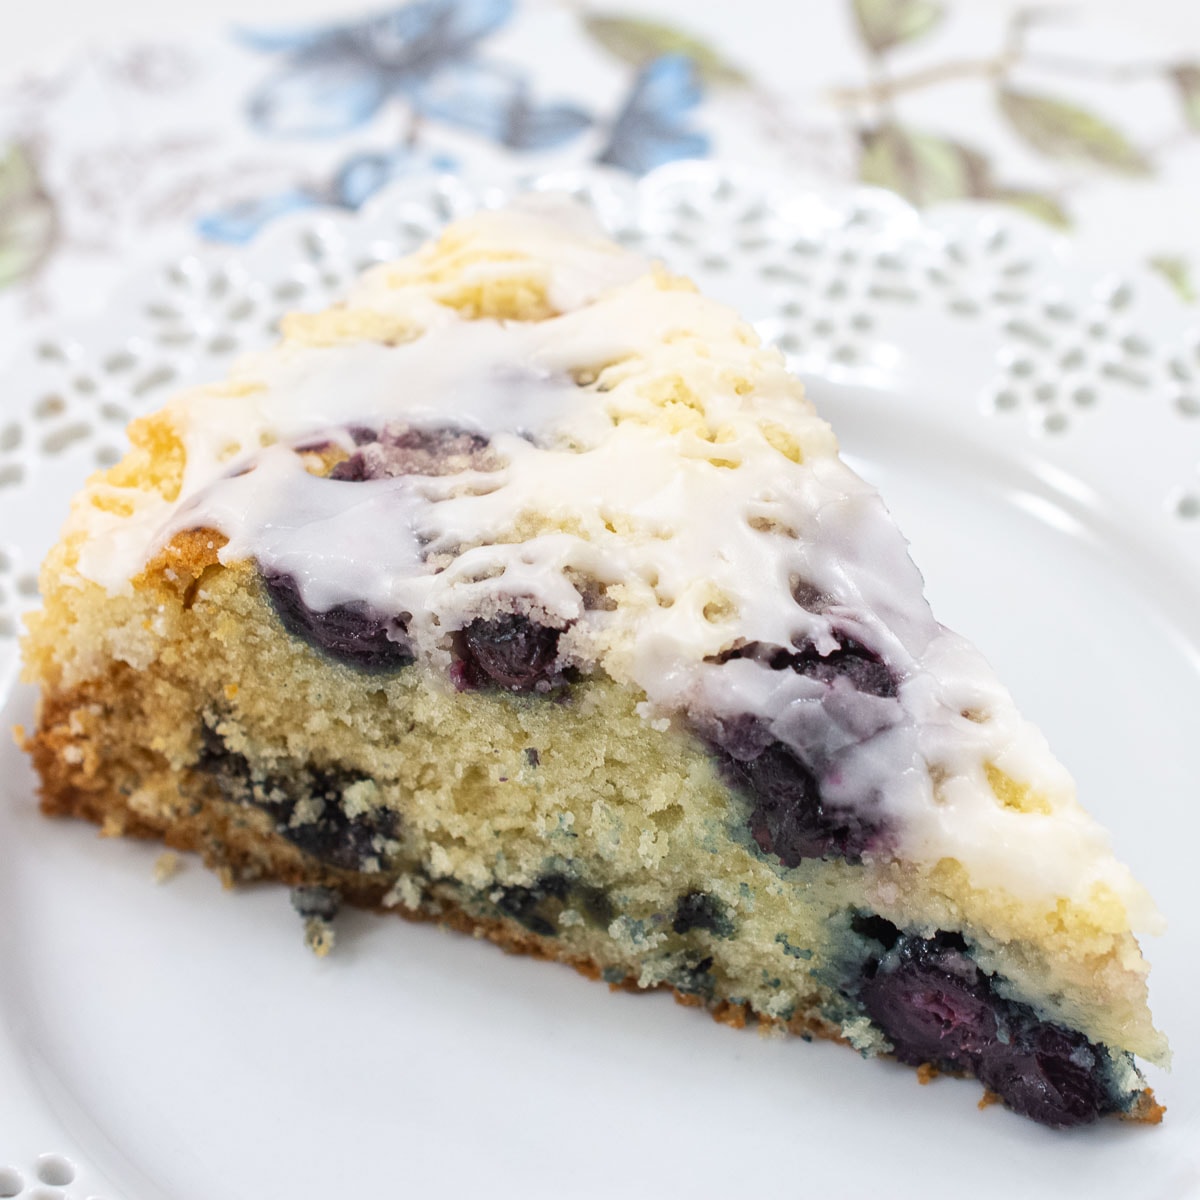 A slice of blueberry crumb coffeecake on a white plate.